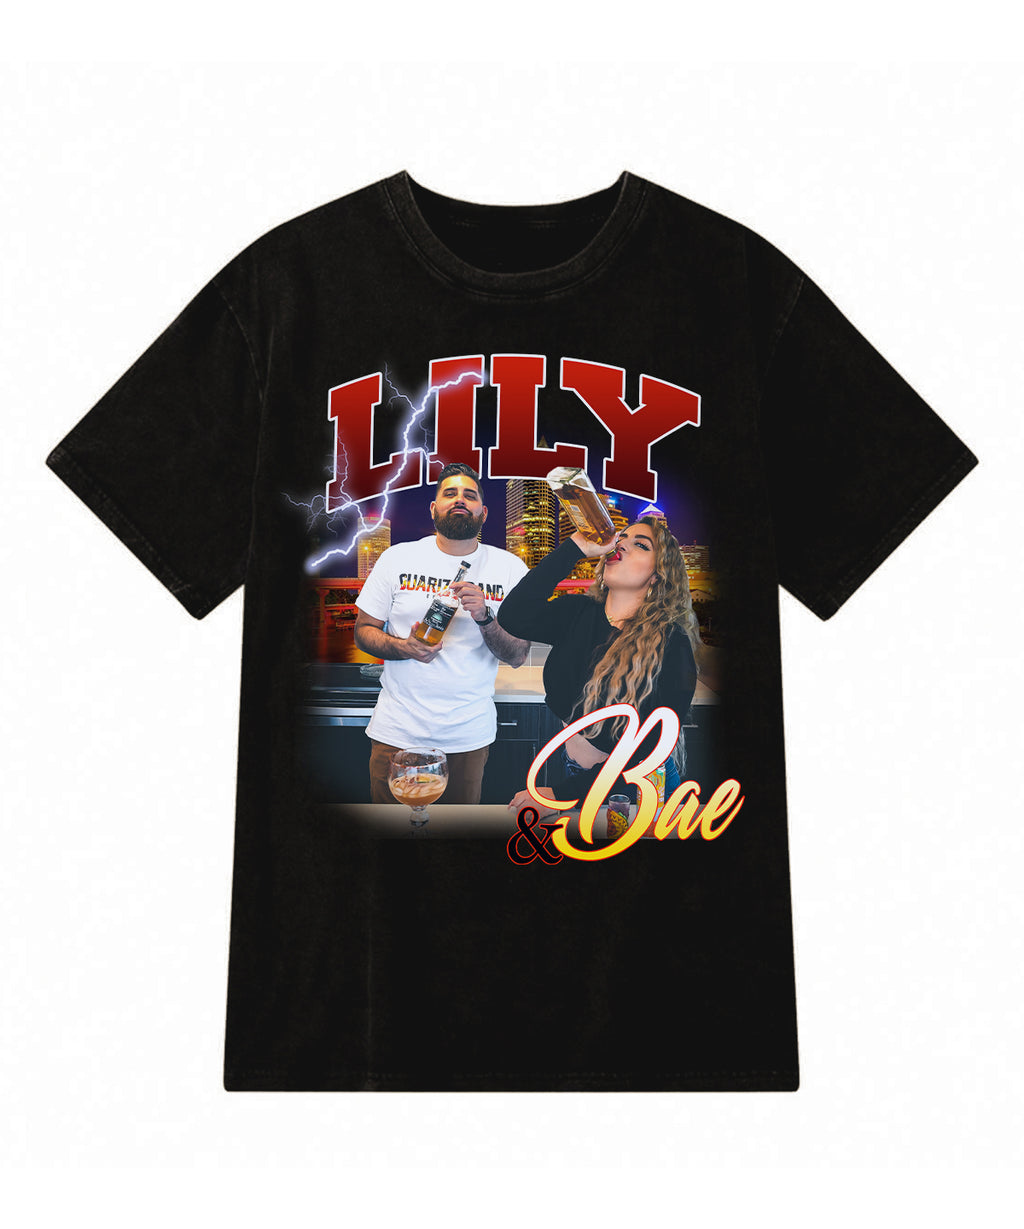 Lily and BAE Vintage T-Shirt